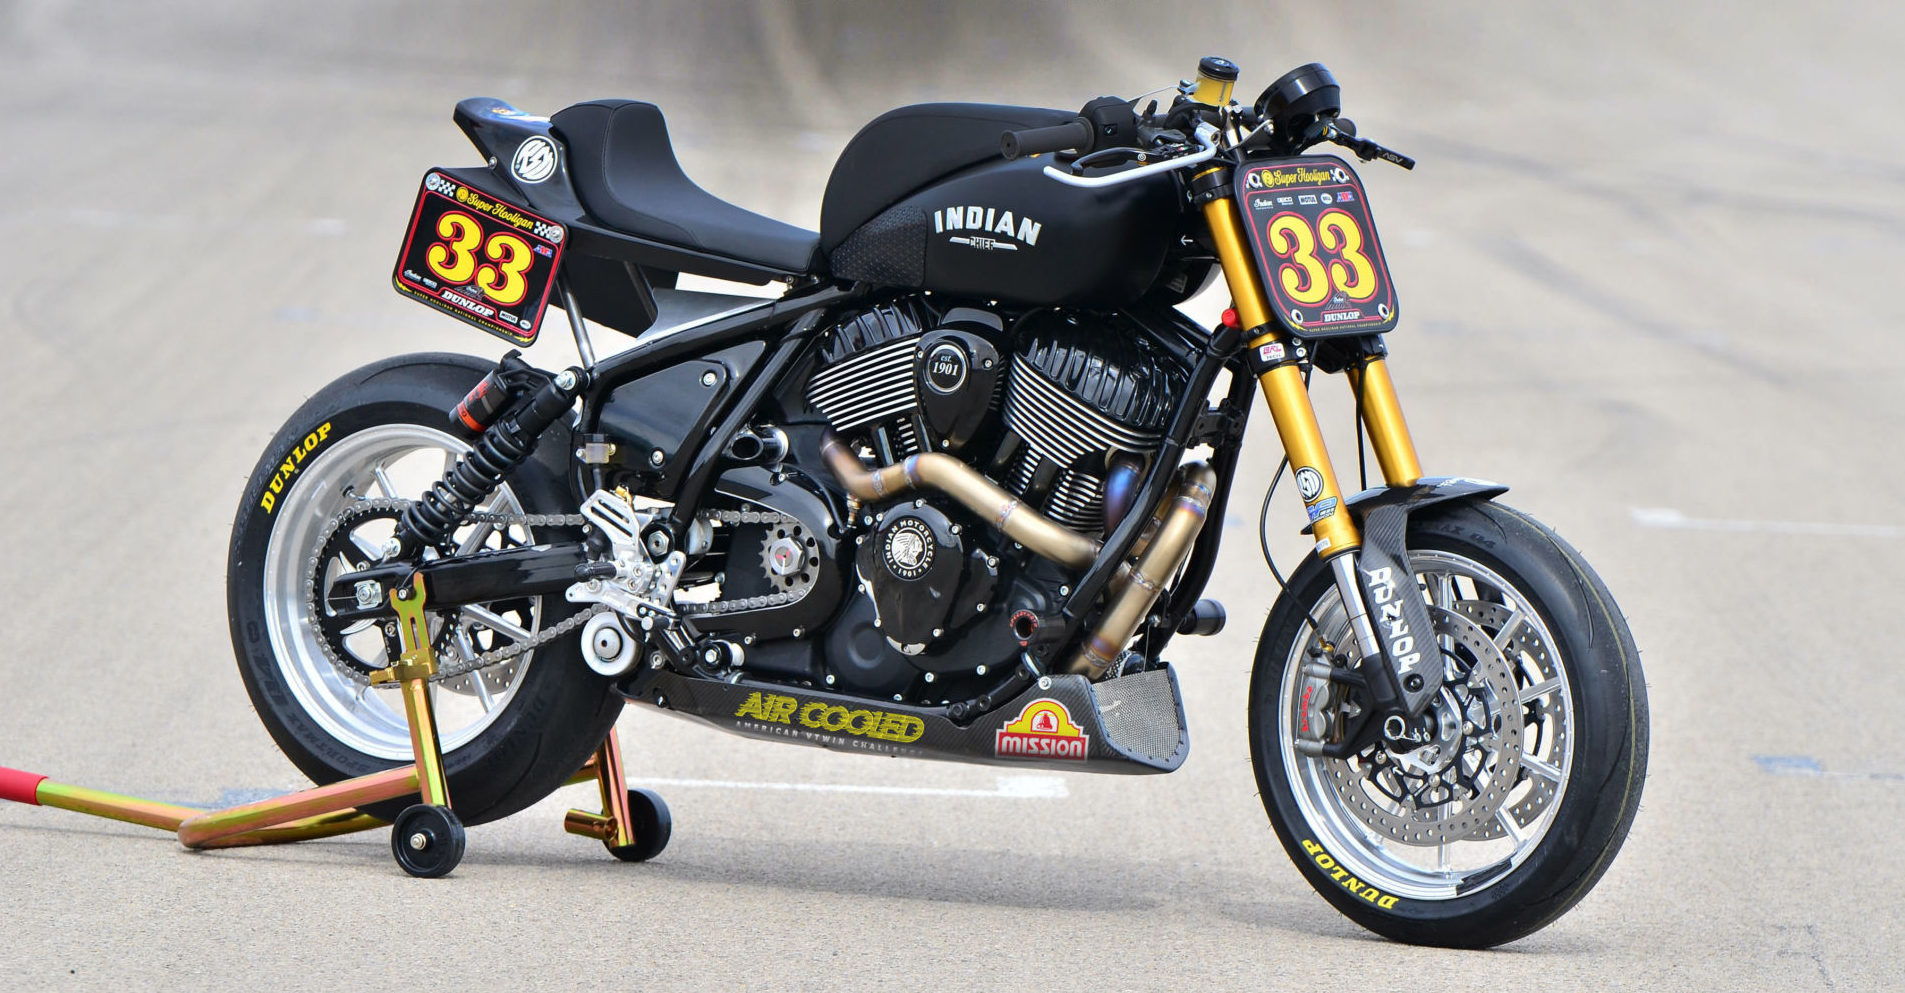 An air-cooled Indian racebike. Photo courtesy Roland Sands Design.